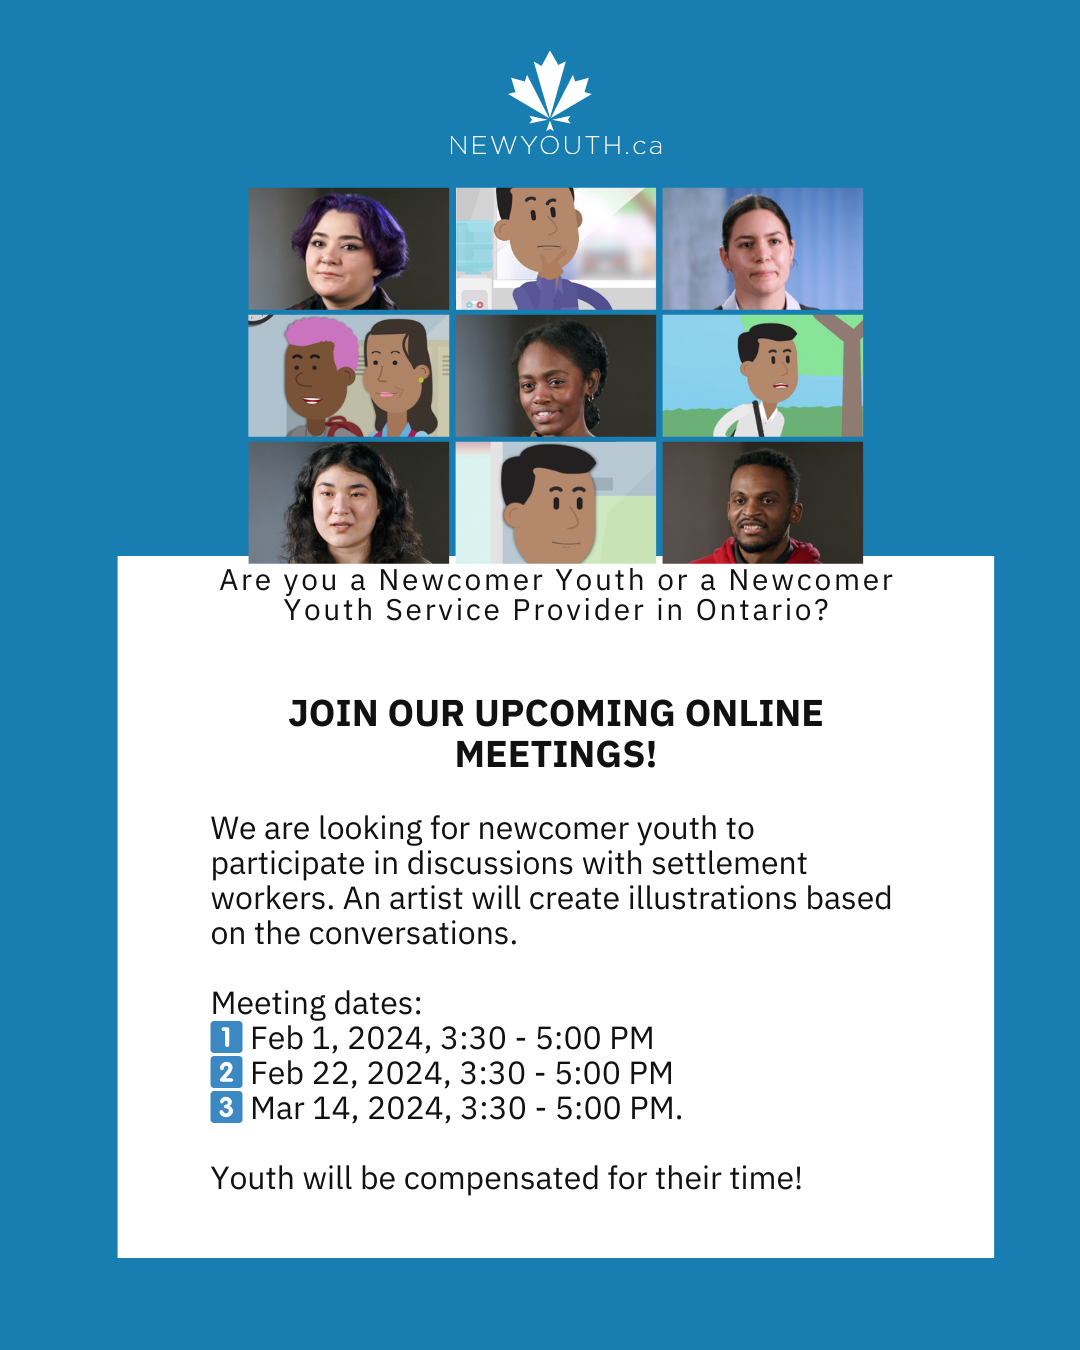 Promotional flyer for YAG meetings